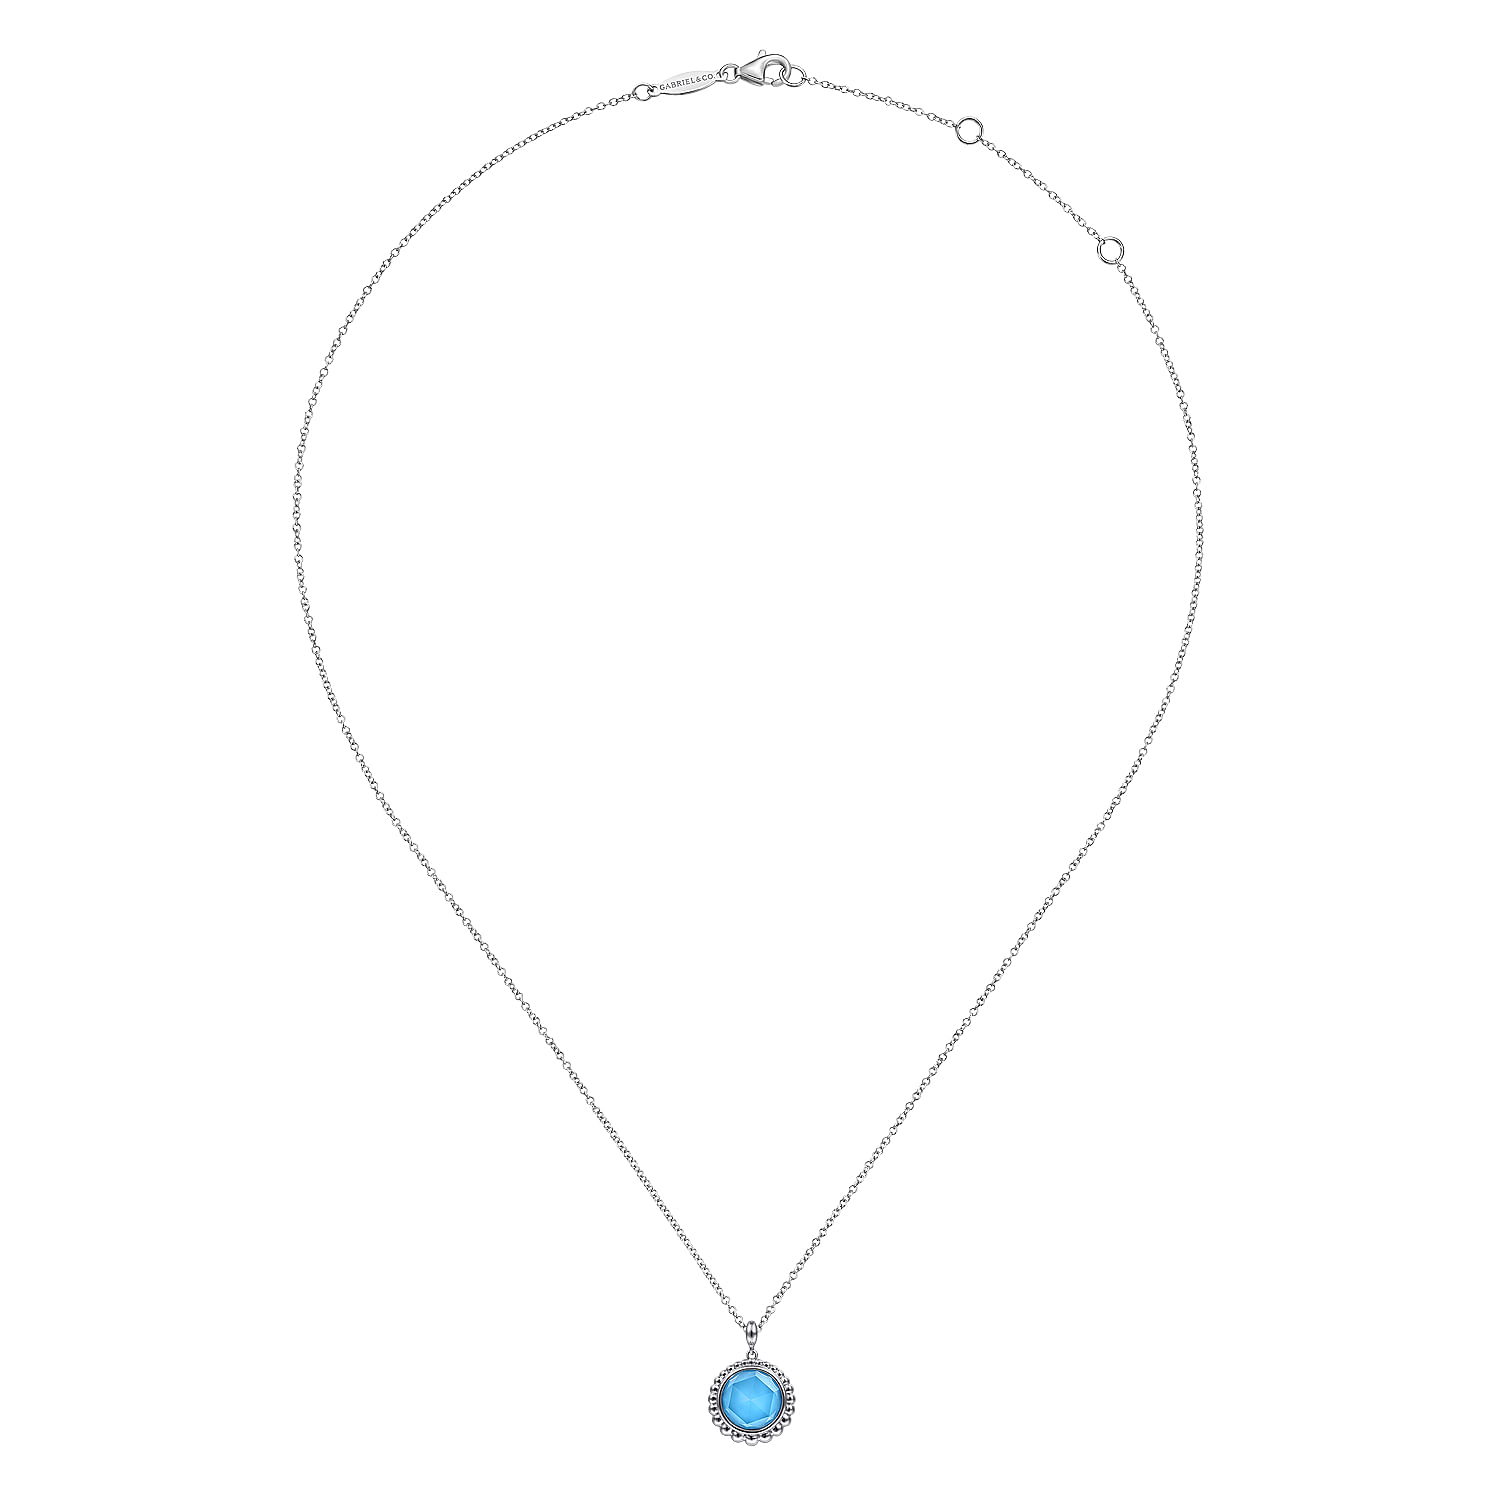 925 Sterling Silver Rock crystal and Turquoise Pendant Necklace